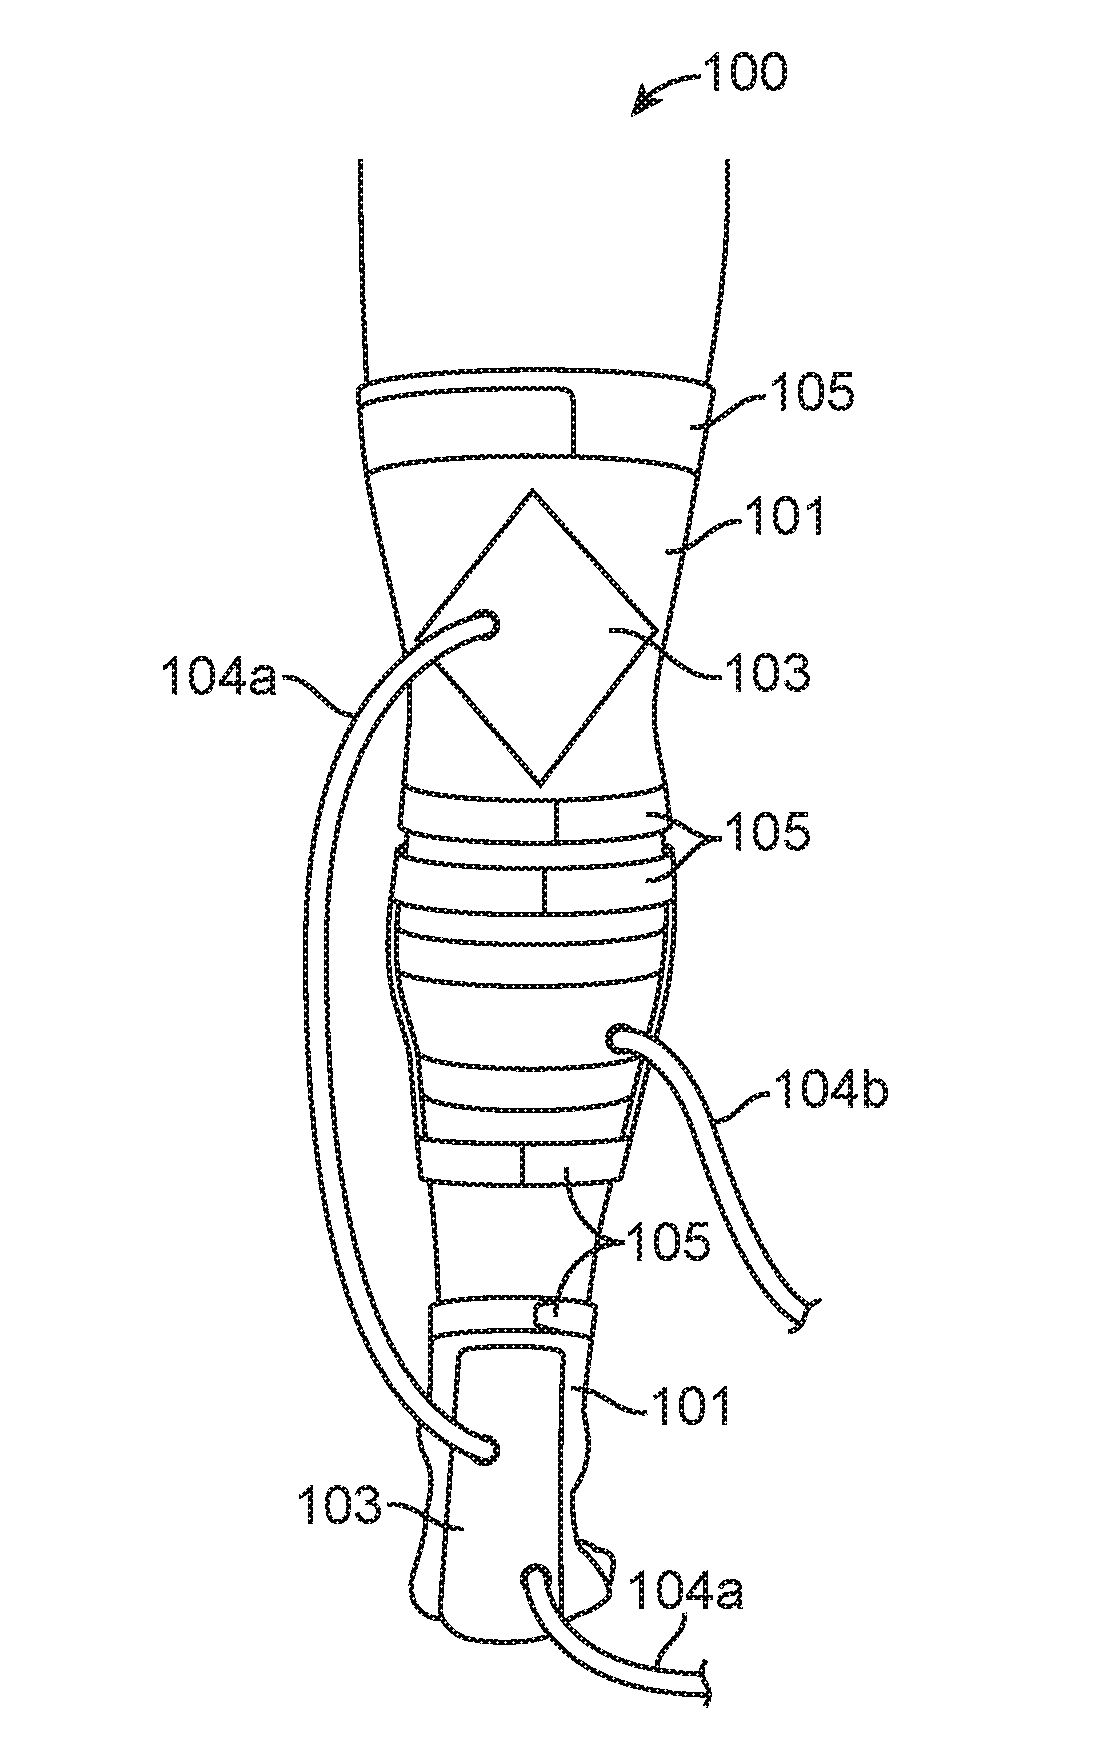 Method and system for regulating core body temperature